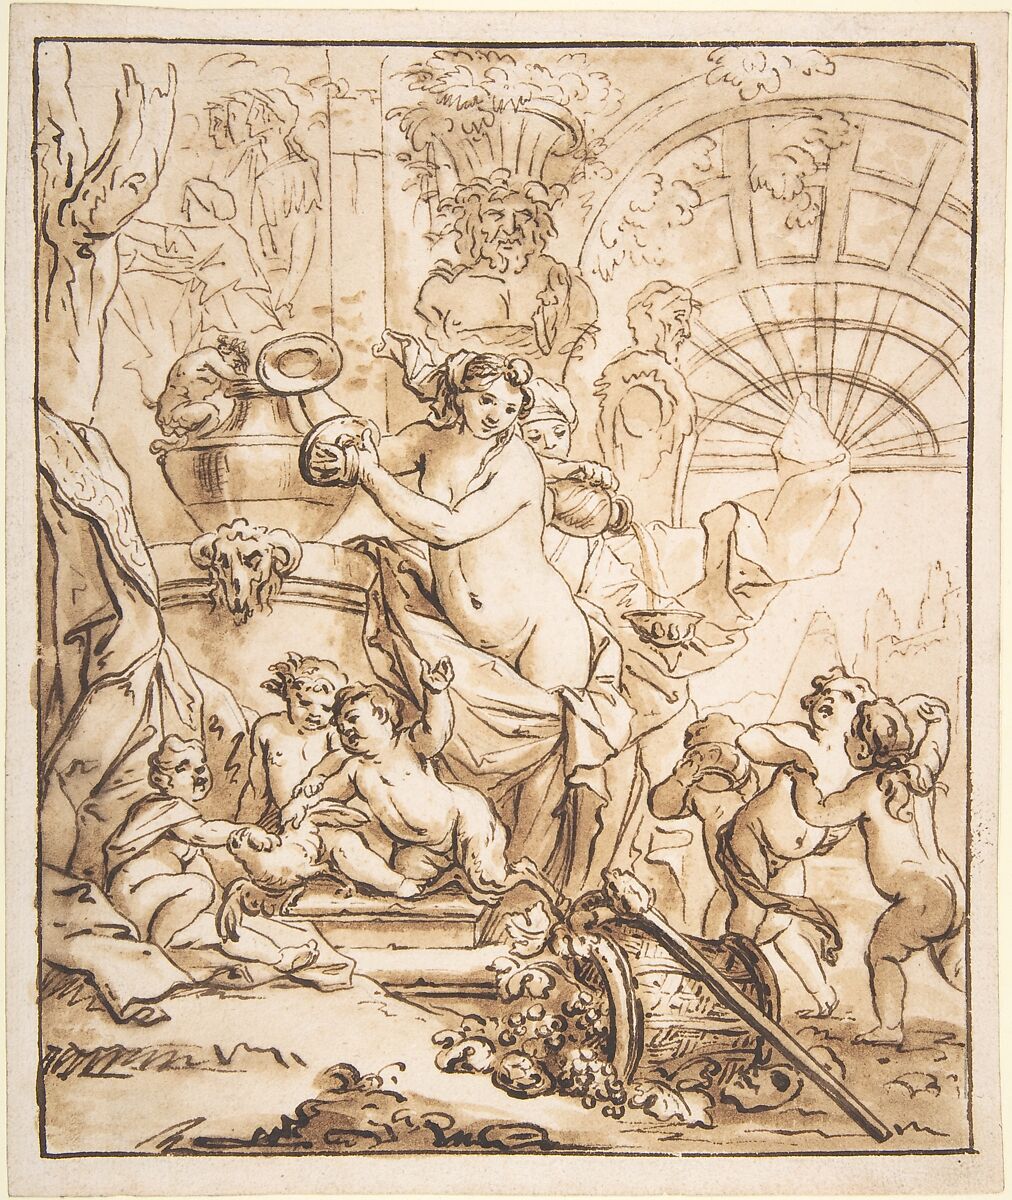 Bacchanalian Scene with Nymphs and Putti, Attributed to Gerard de Lairesse (Dutch, Liège 1641–1711 Amsterdam), Pen and brown ink, brown wash. 